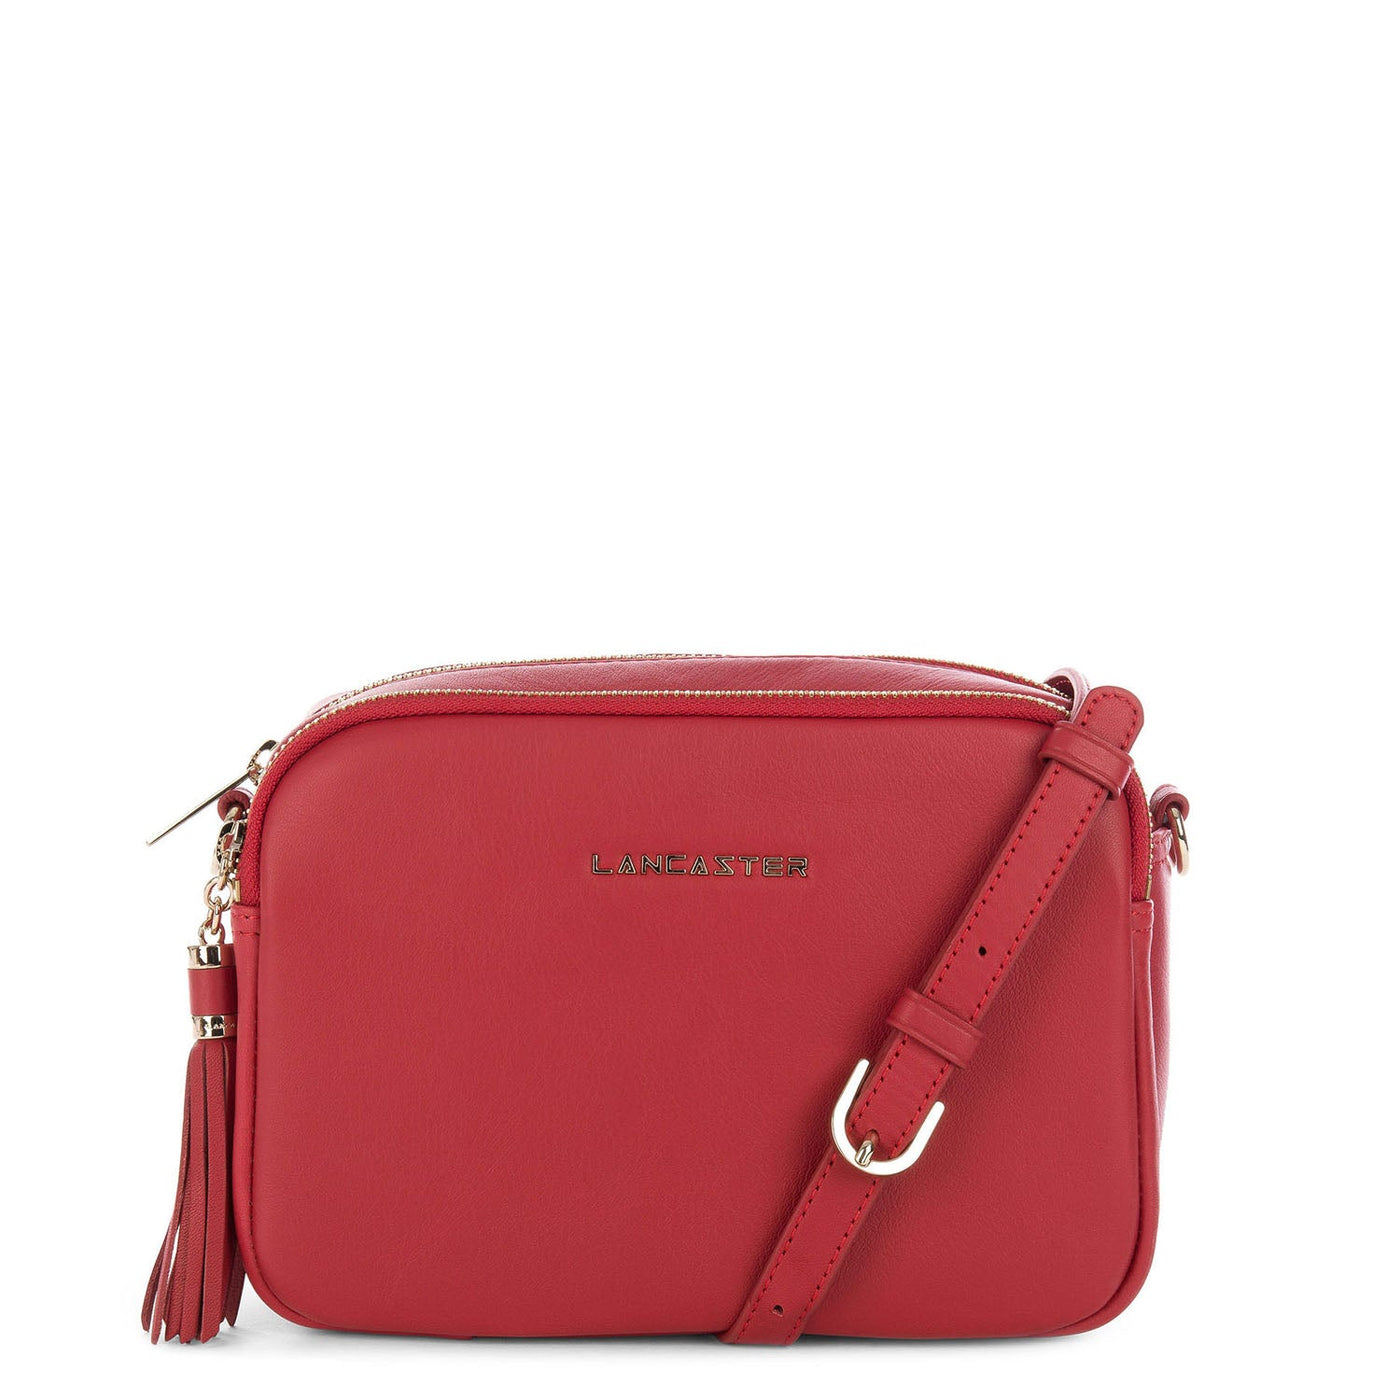 m crossbody bag - mademoiselle ana #couleur_rouge